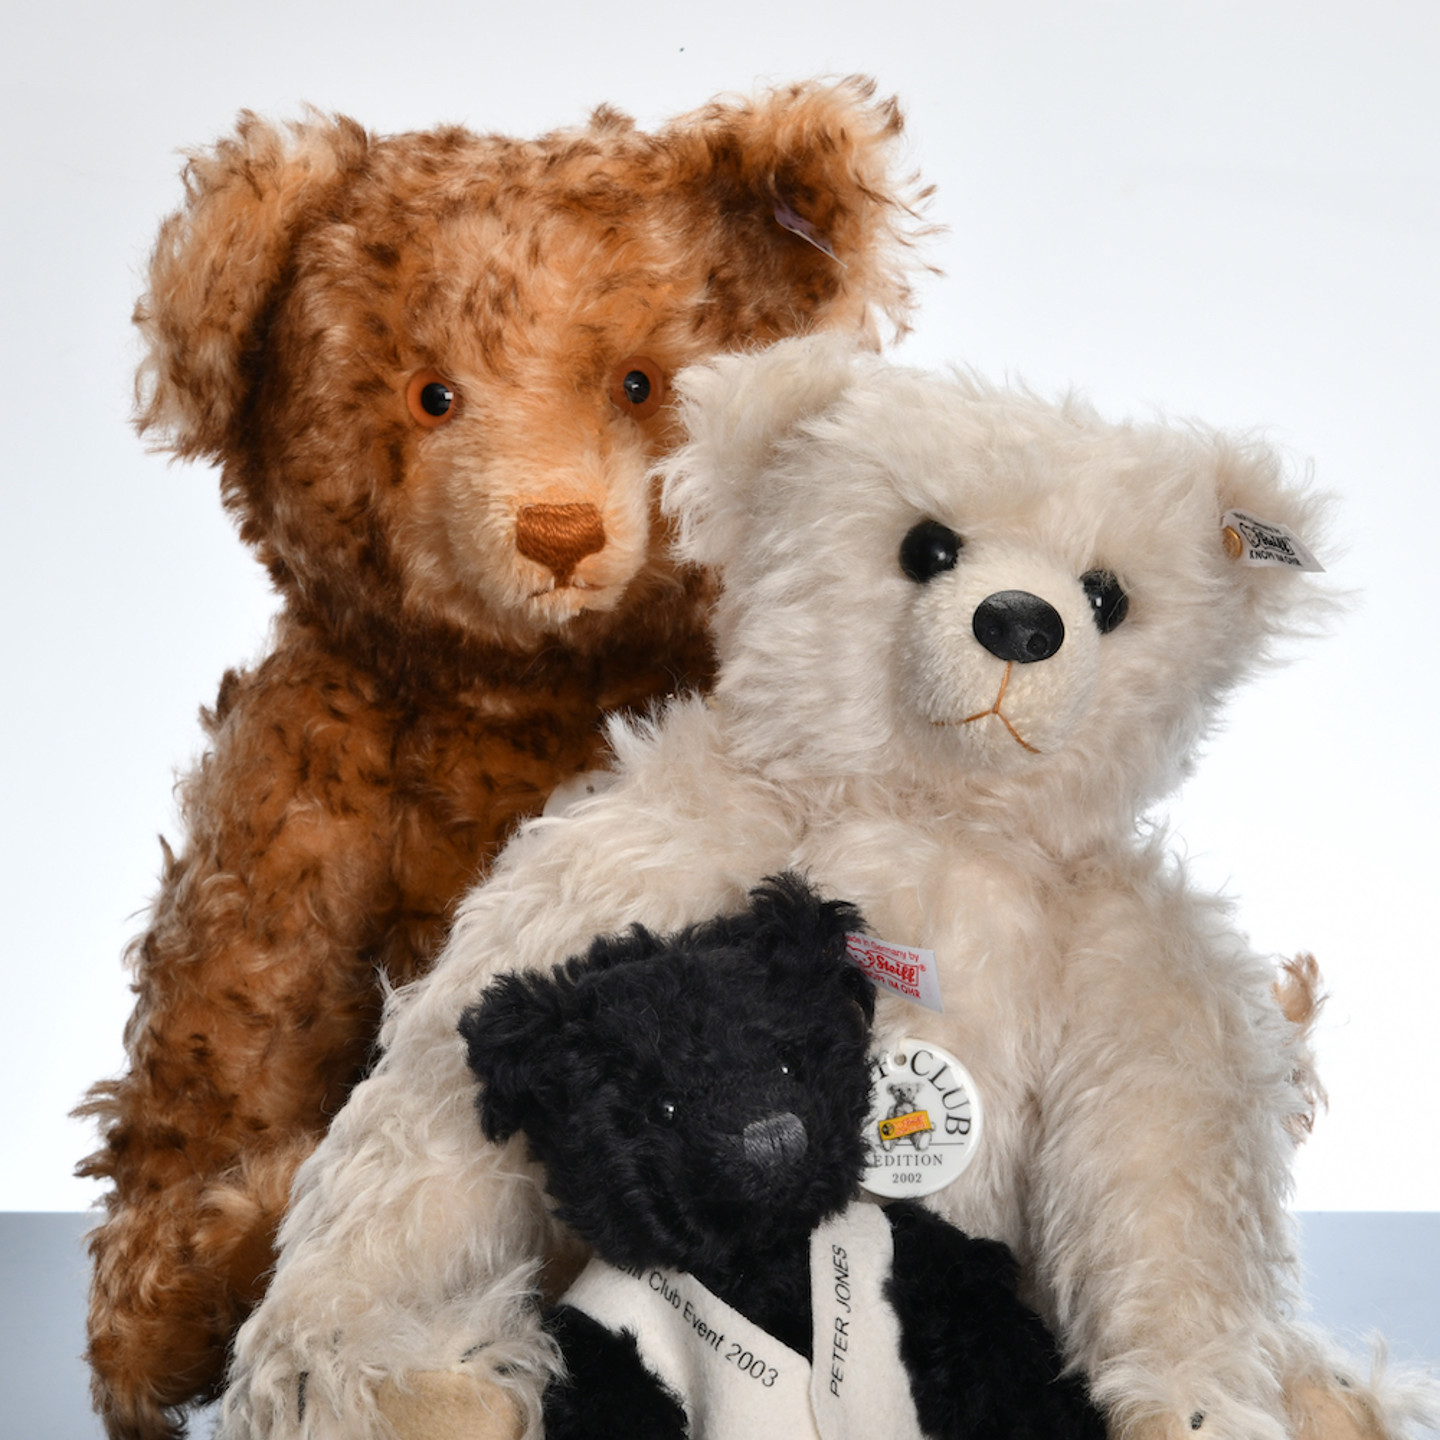 Large Private Collection Of Teddy Bears Sold £33,000